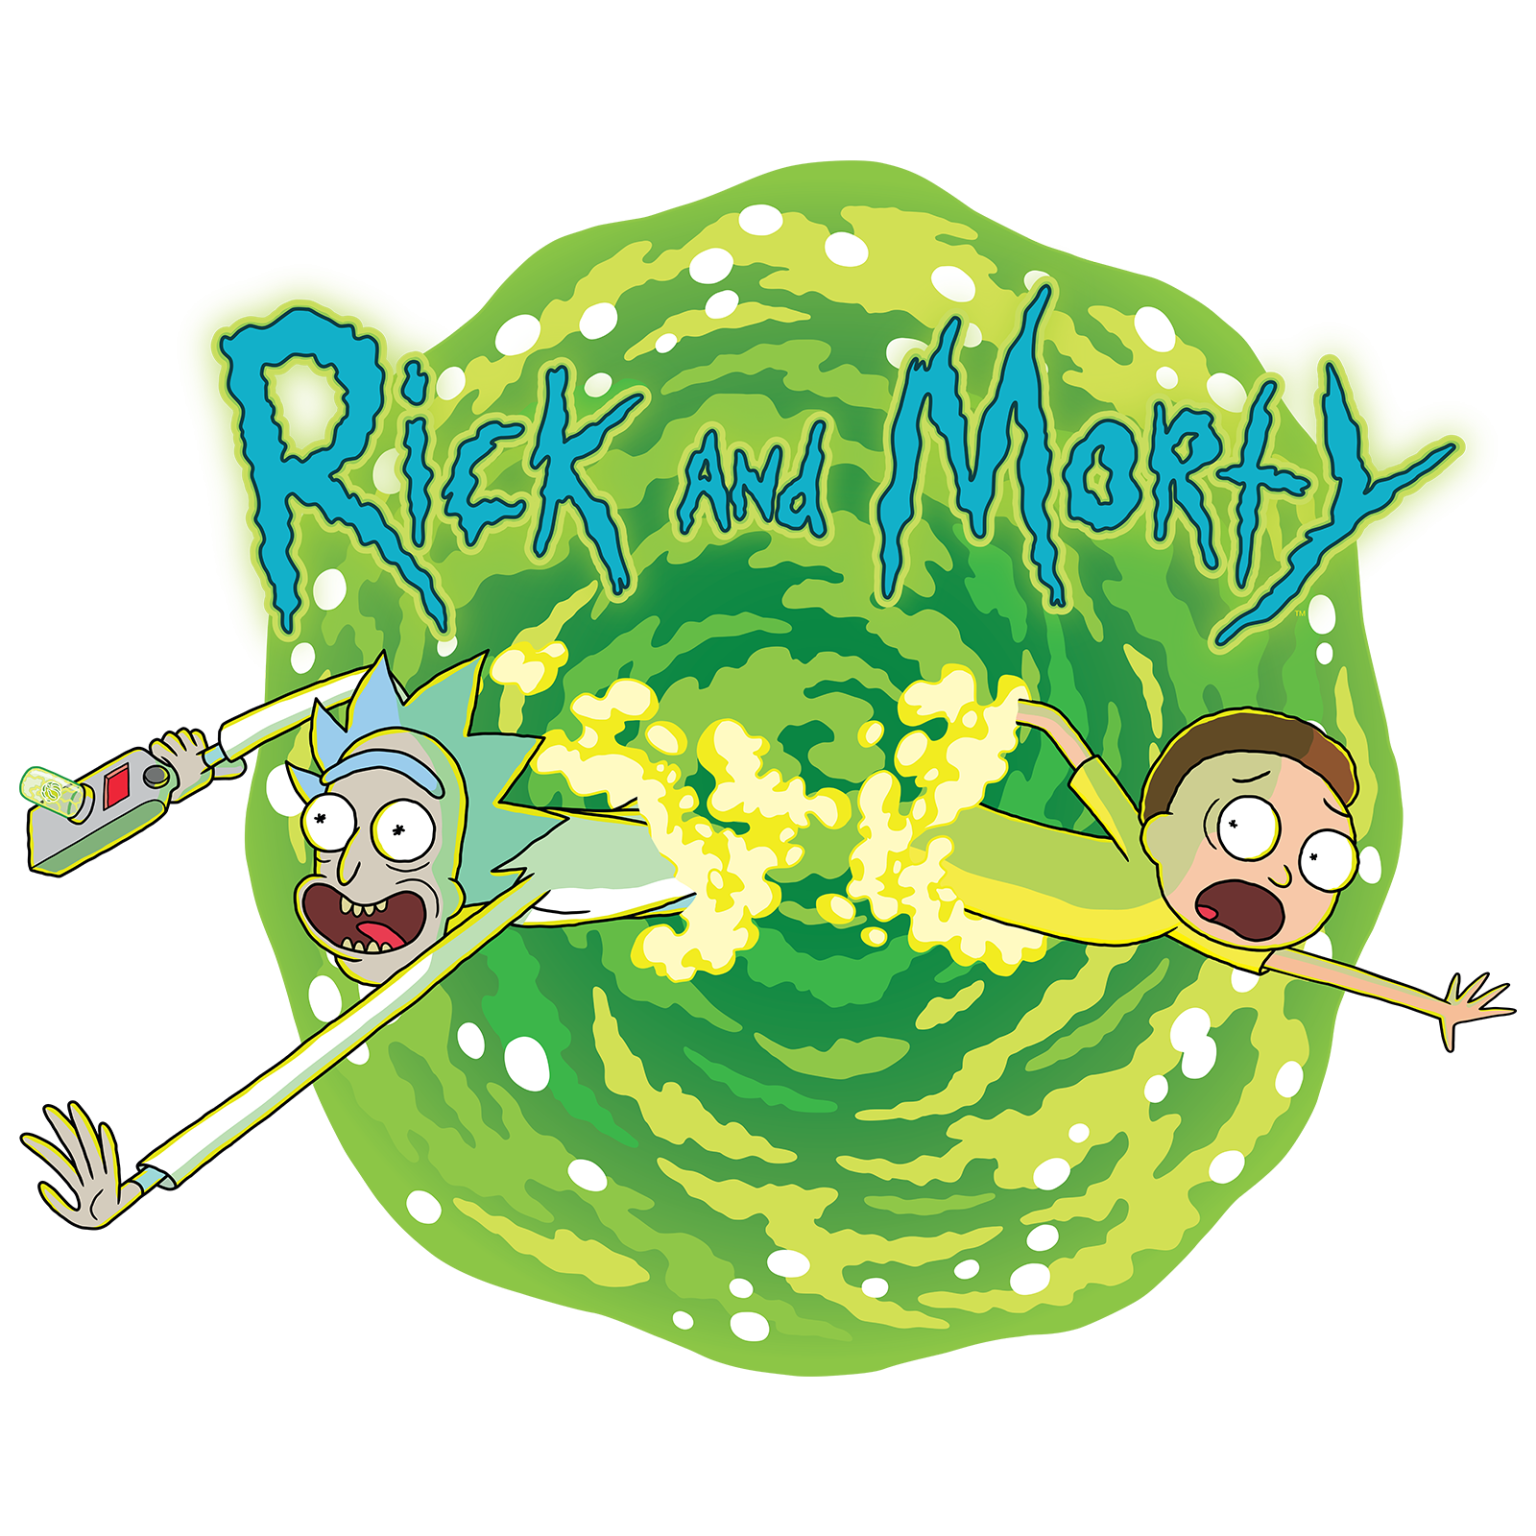 Rick and morty logo png - Download Free Png Images